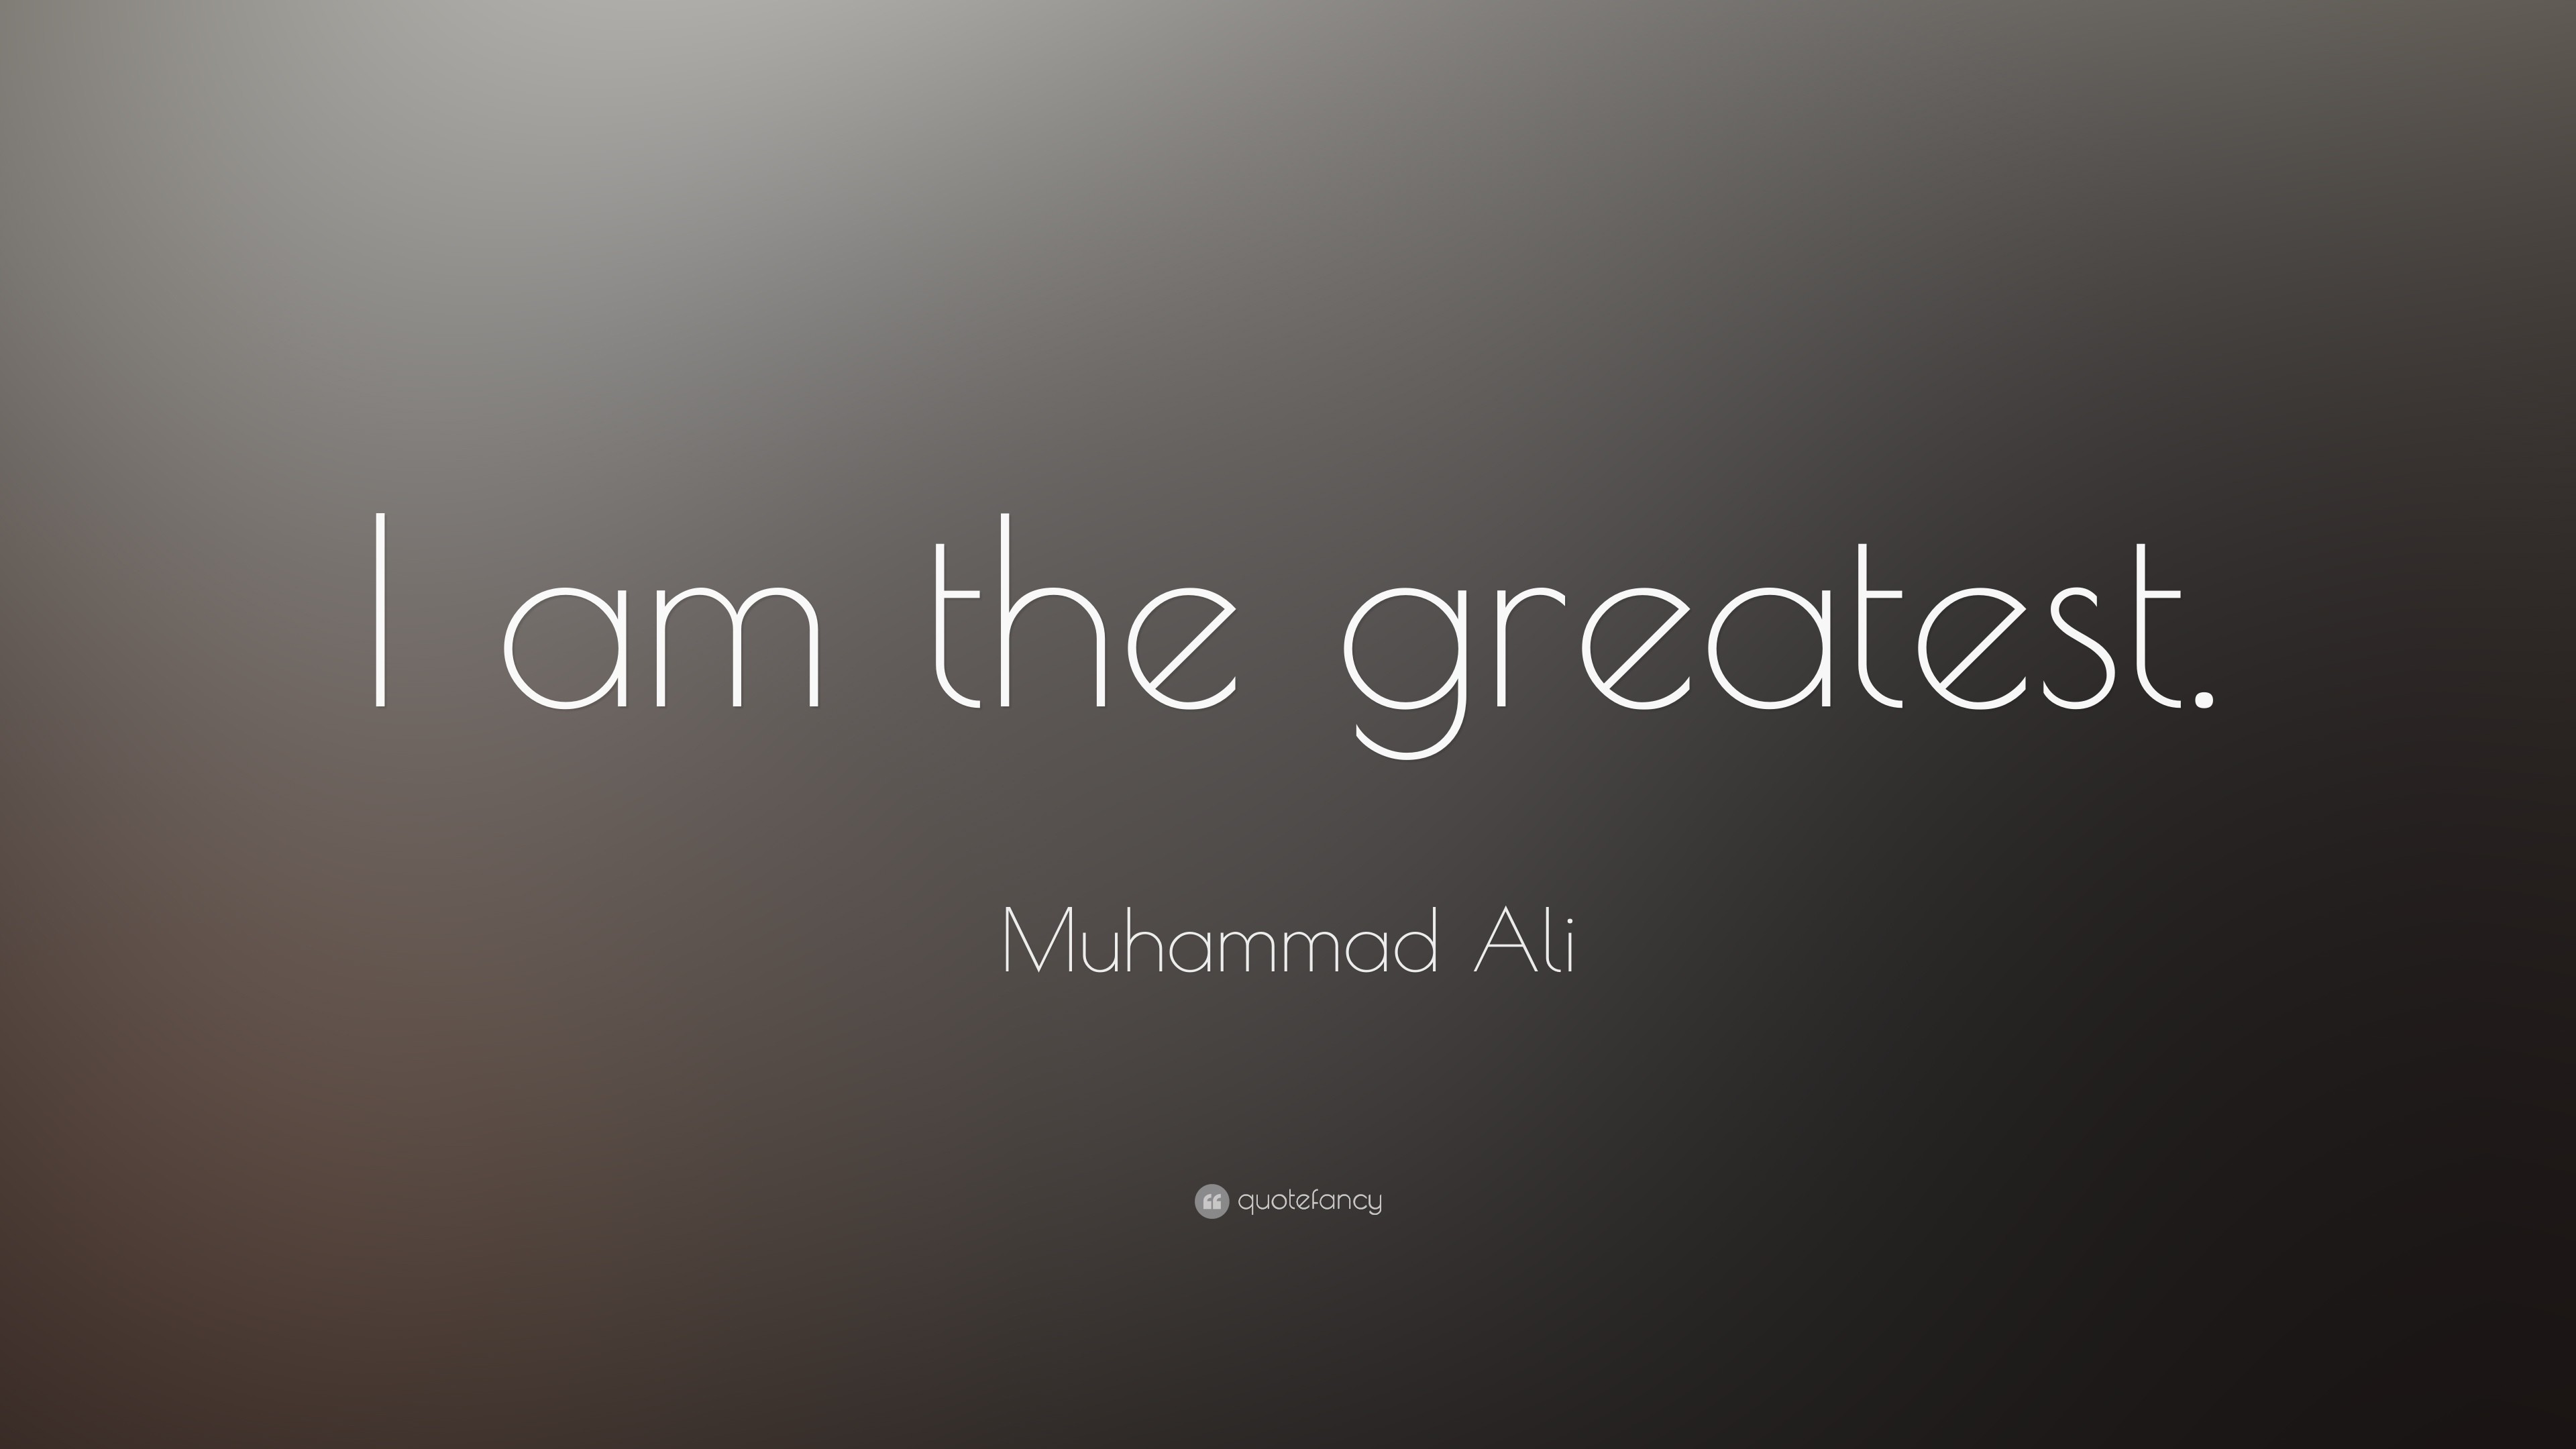 3840x2160 Muhammad Ali Quote: “I am the greatest.”